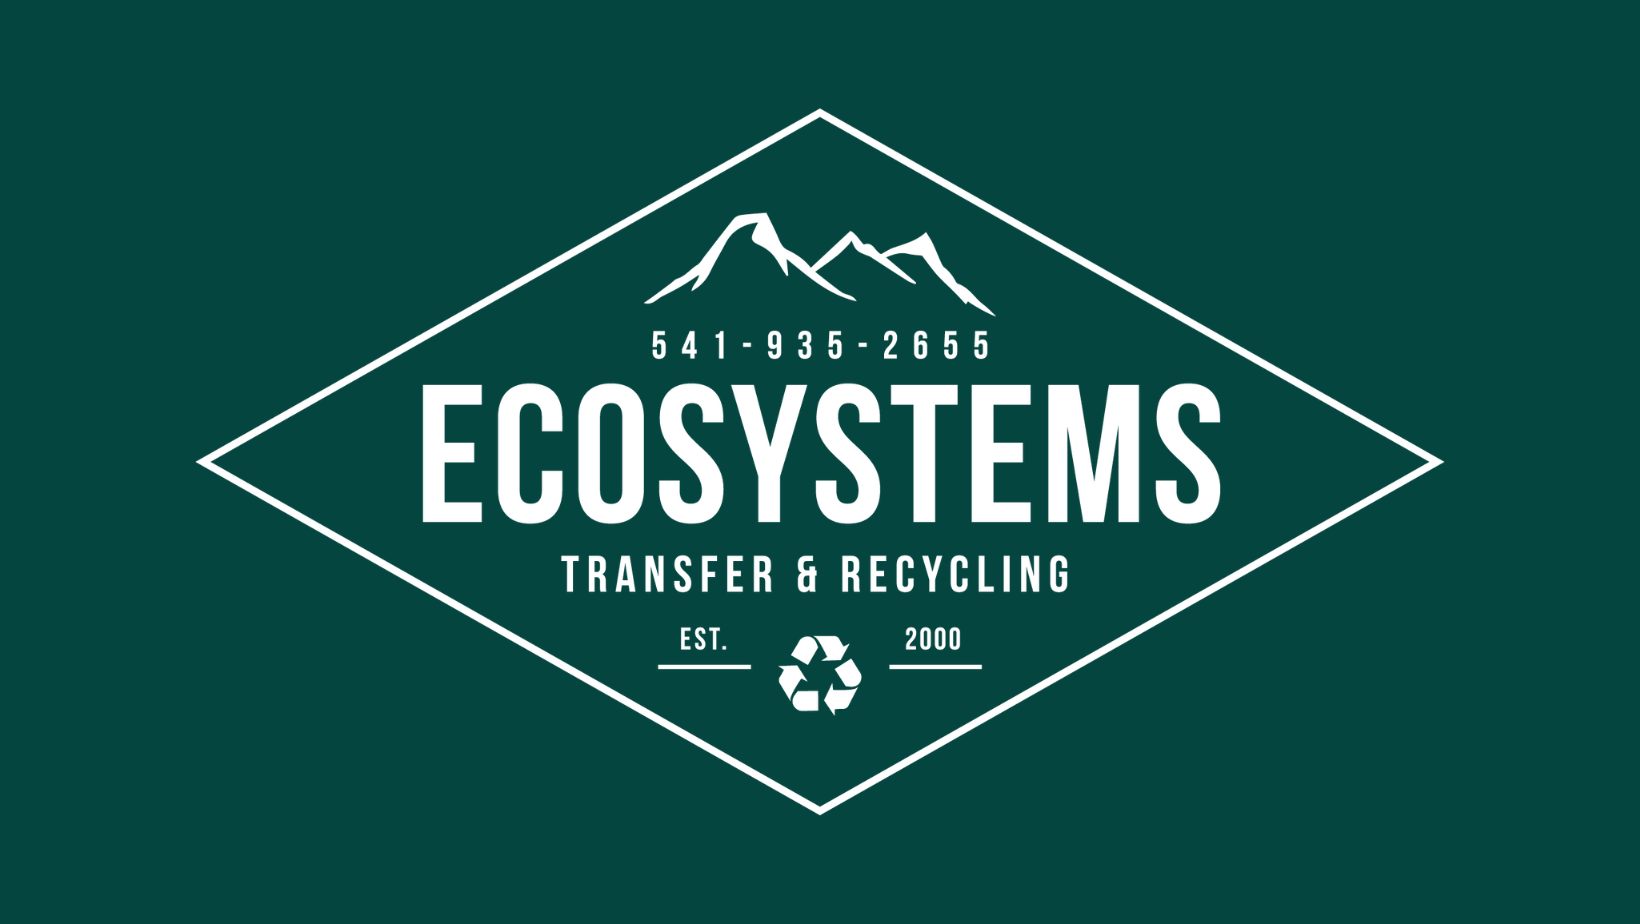 Ecosystems Transfer & Recycling